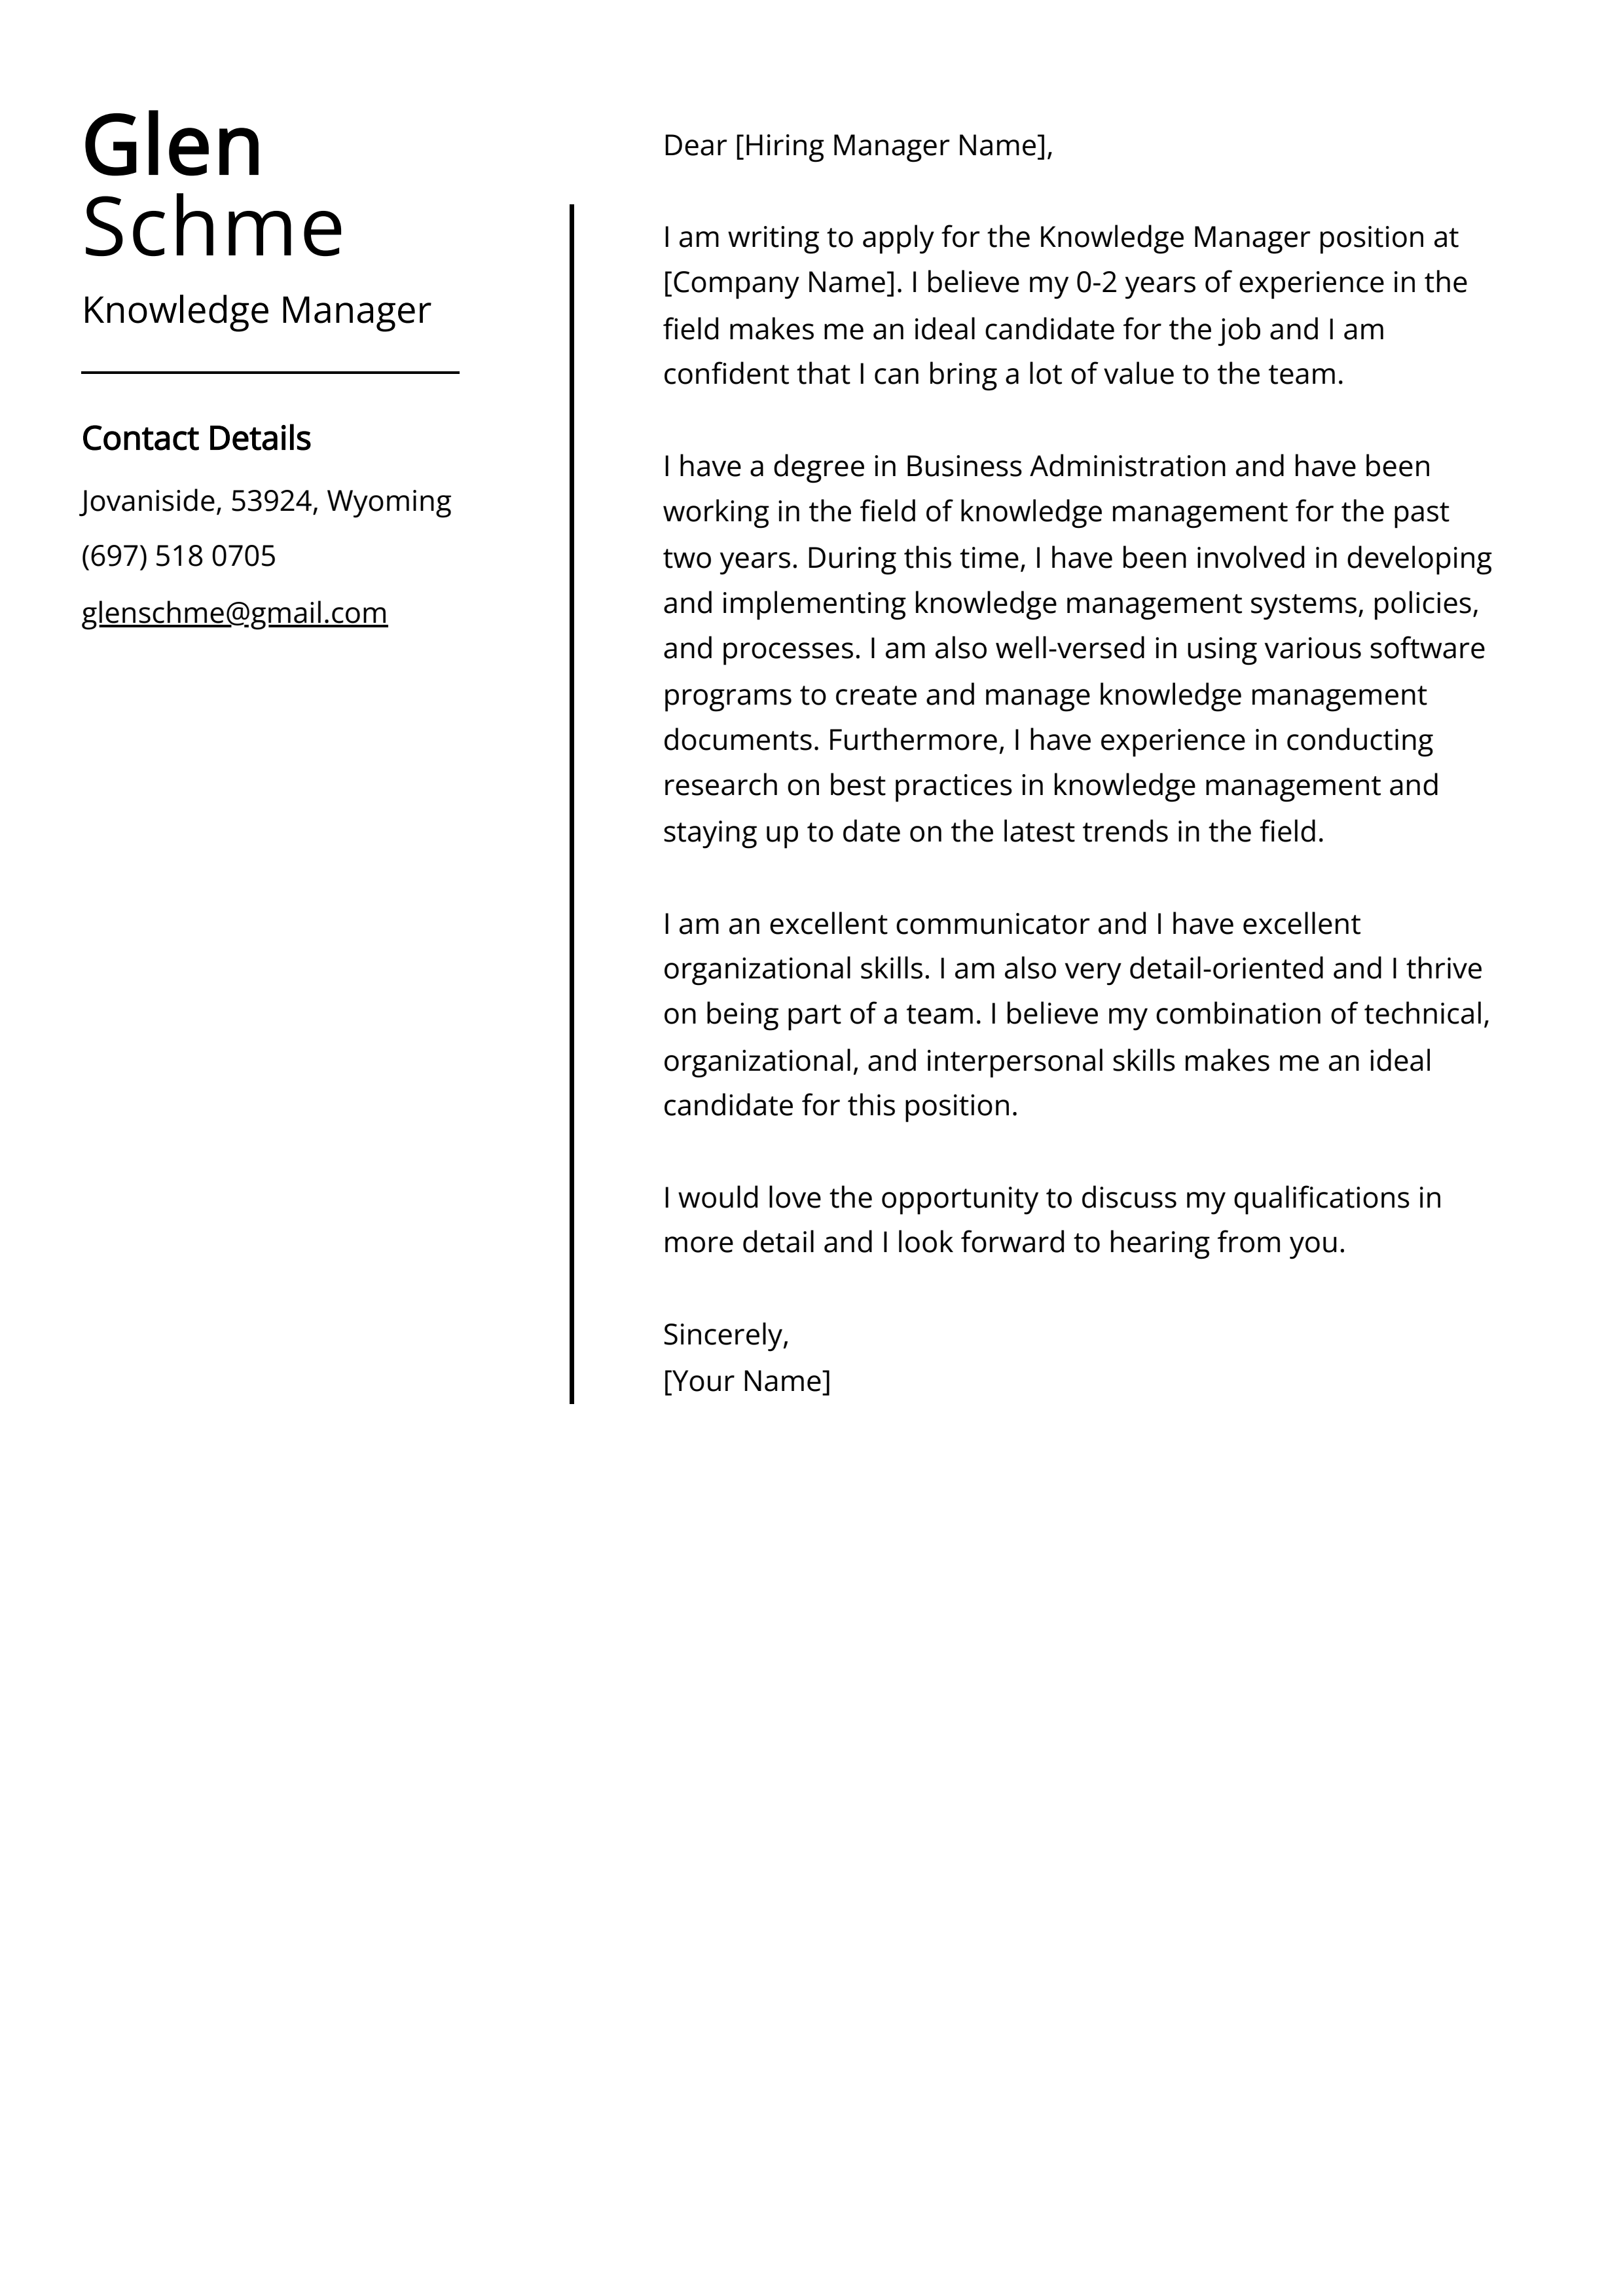 Knowledge Manager Cover Letter Example